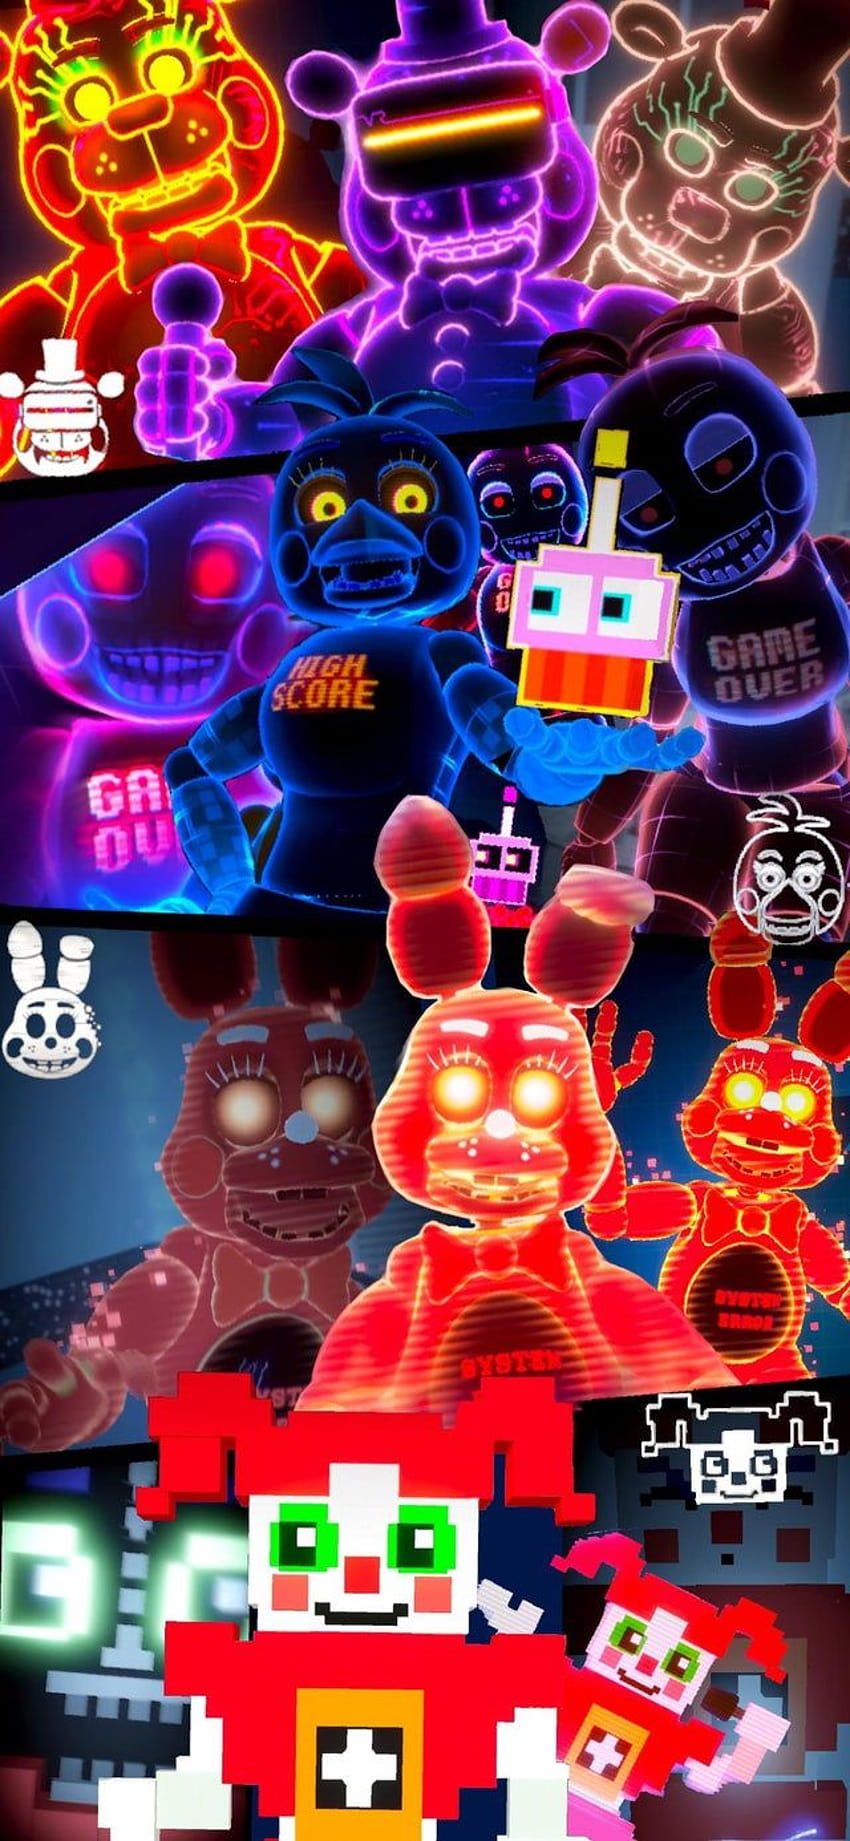 Five Nights at Freddys wallpaper  Game wallpapers  35600